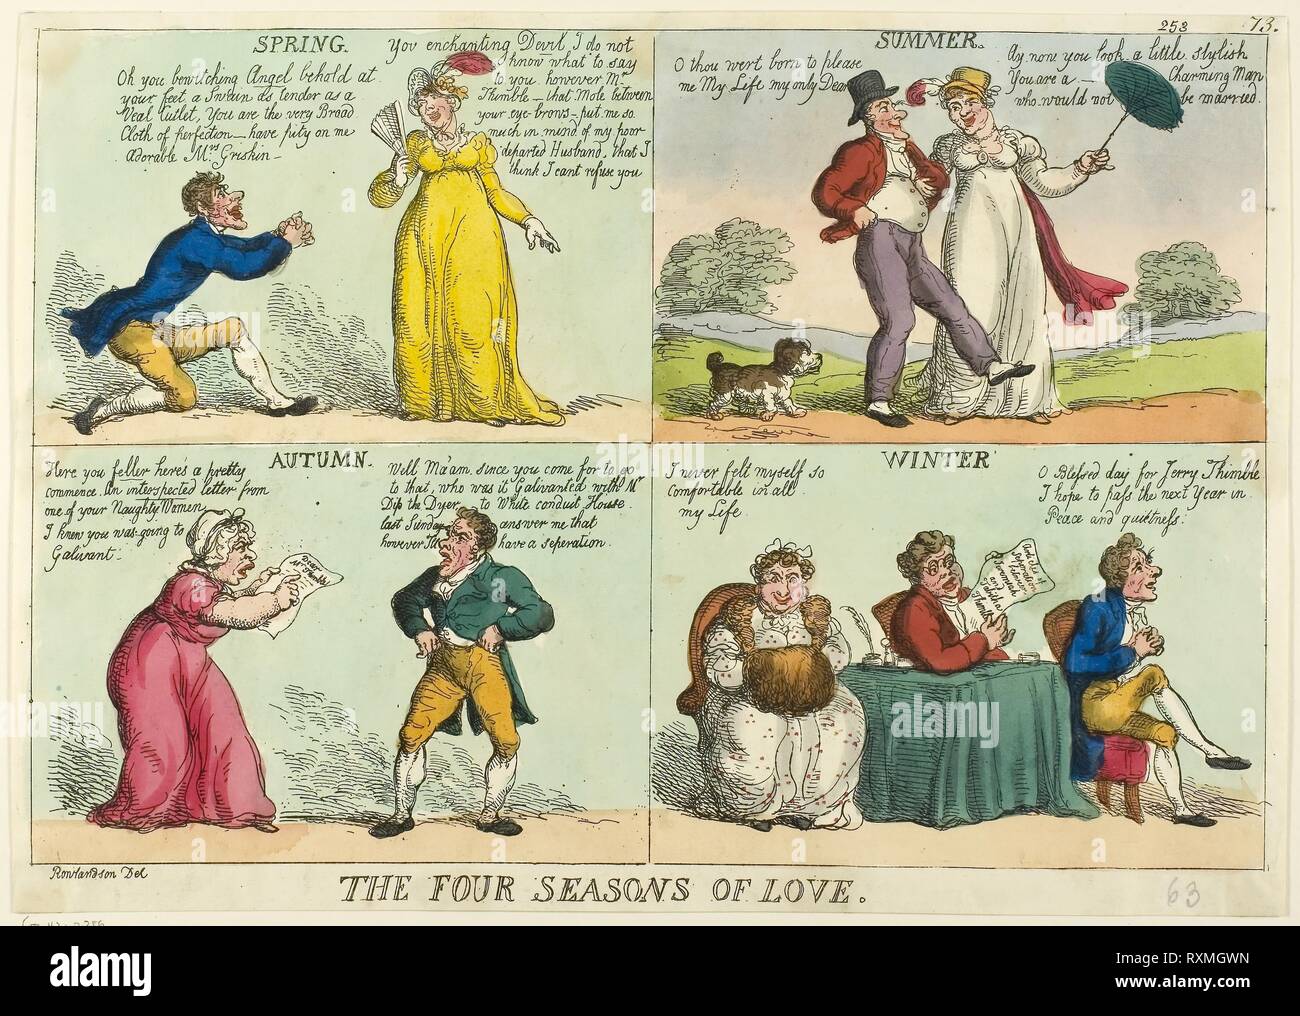 The Four Seasons of Love. Thomas Rowlandson (English, 1756-1827); published by Thomas Tegg (English, 1776-1845). Date: 1814. Dimensions: 225 × 330 mm (image); 243 × 340 mm (sheet, trimmed to platemark). Hand-colored etching on ivory wove paper. Origin: England. Museum: The Chicago Art Institute. Stock Photo